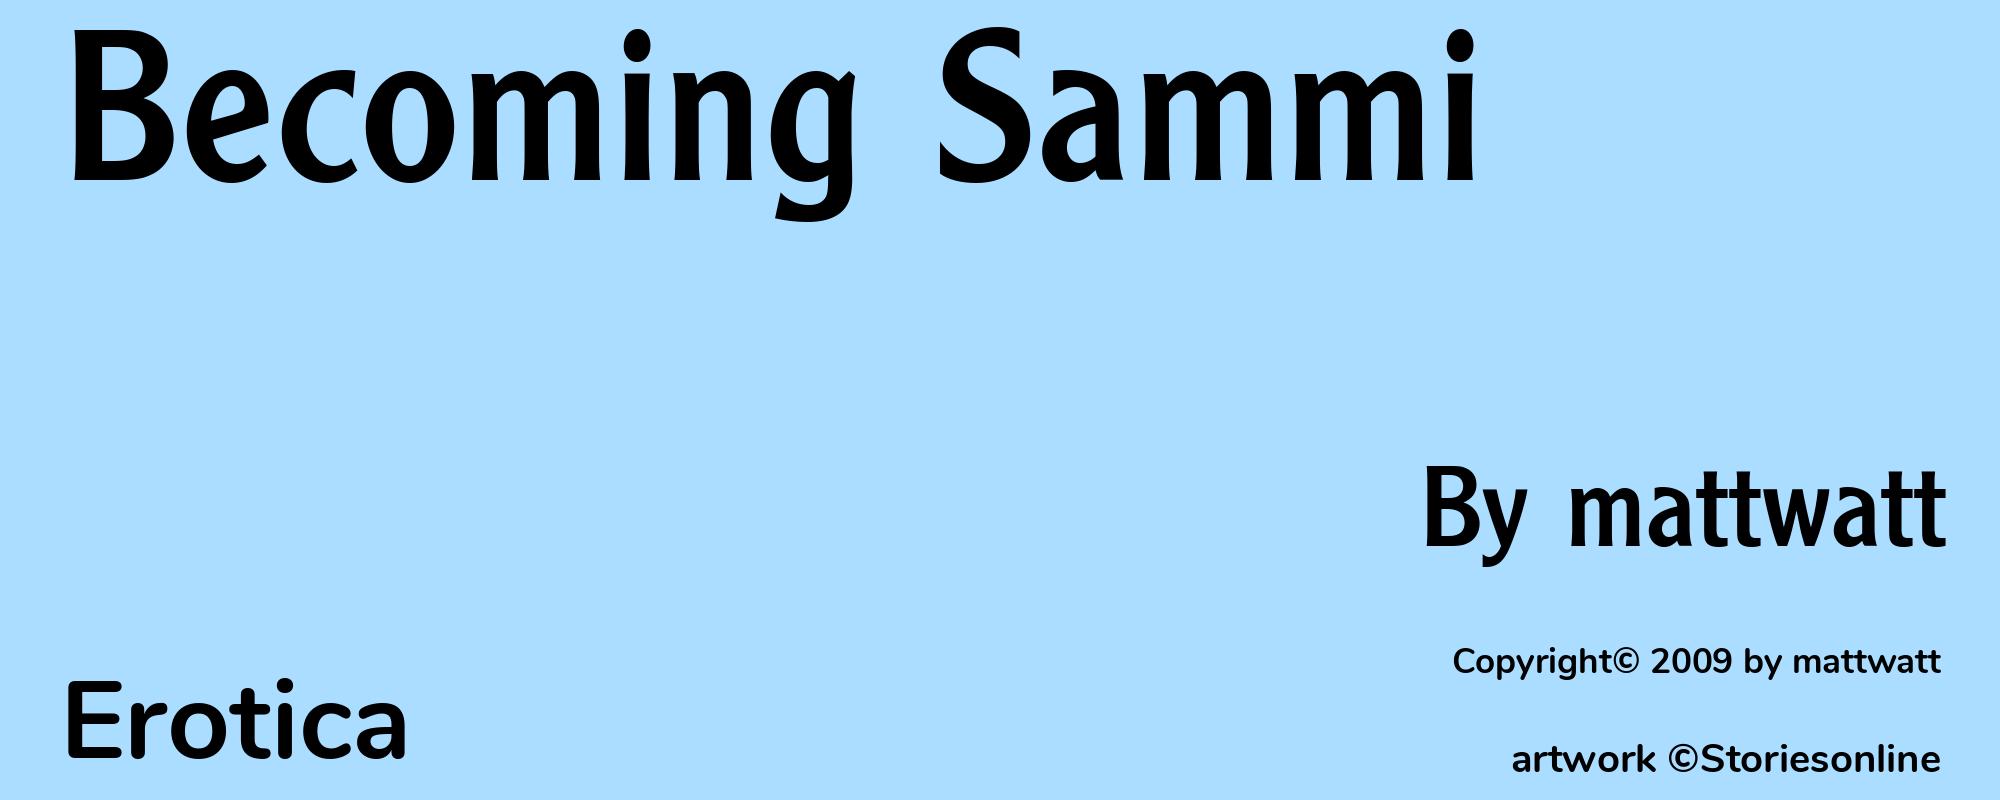 Becoming Sammi - Cover